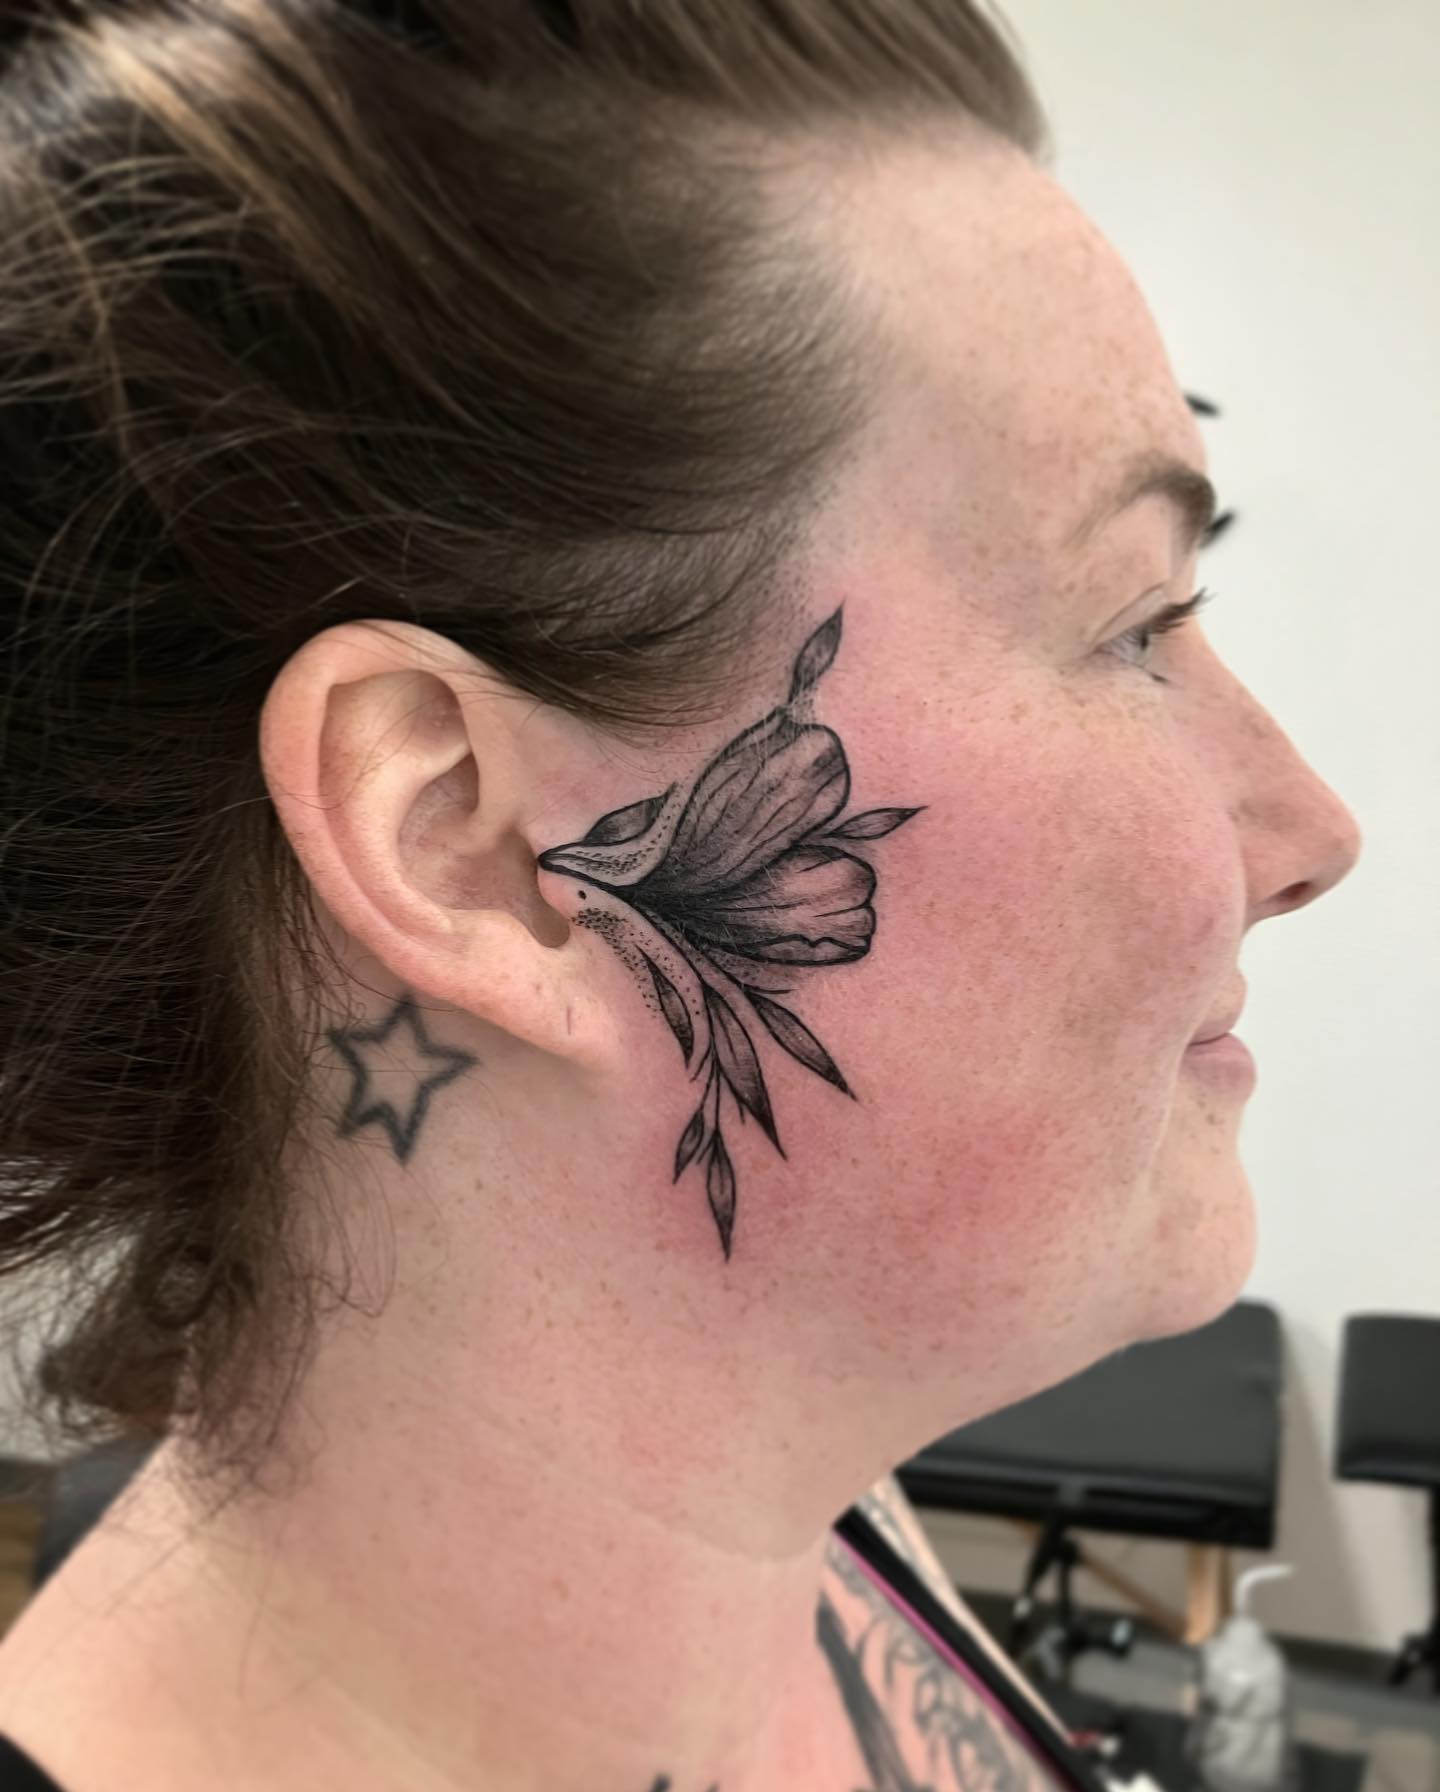 If you feel as if someone is whispering to you all the time and you believe that you have your very own positive guardian angel, this black ink tattoo is for you.